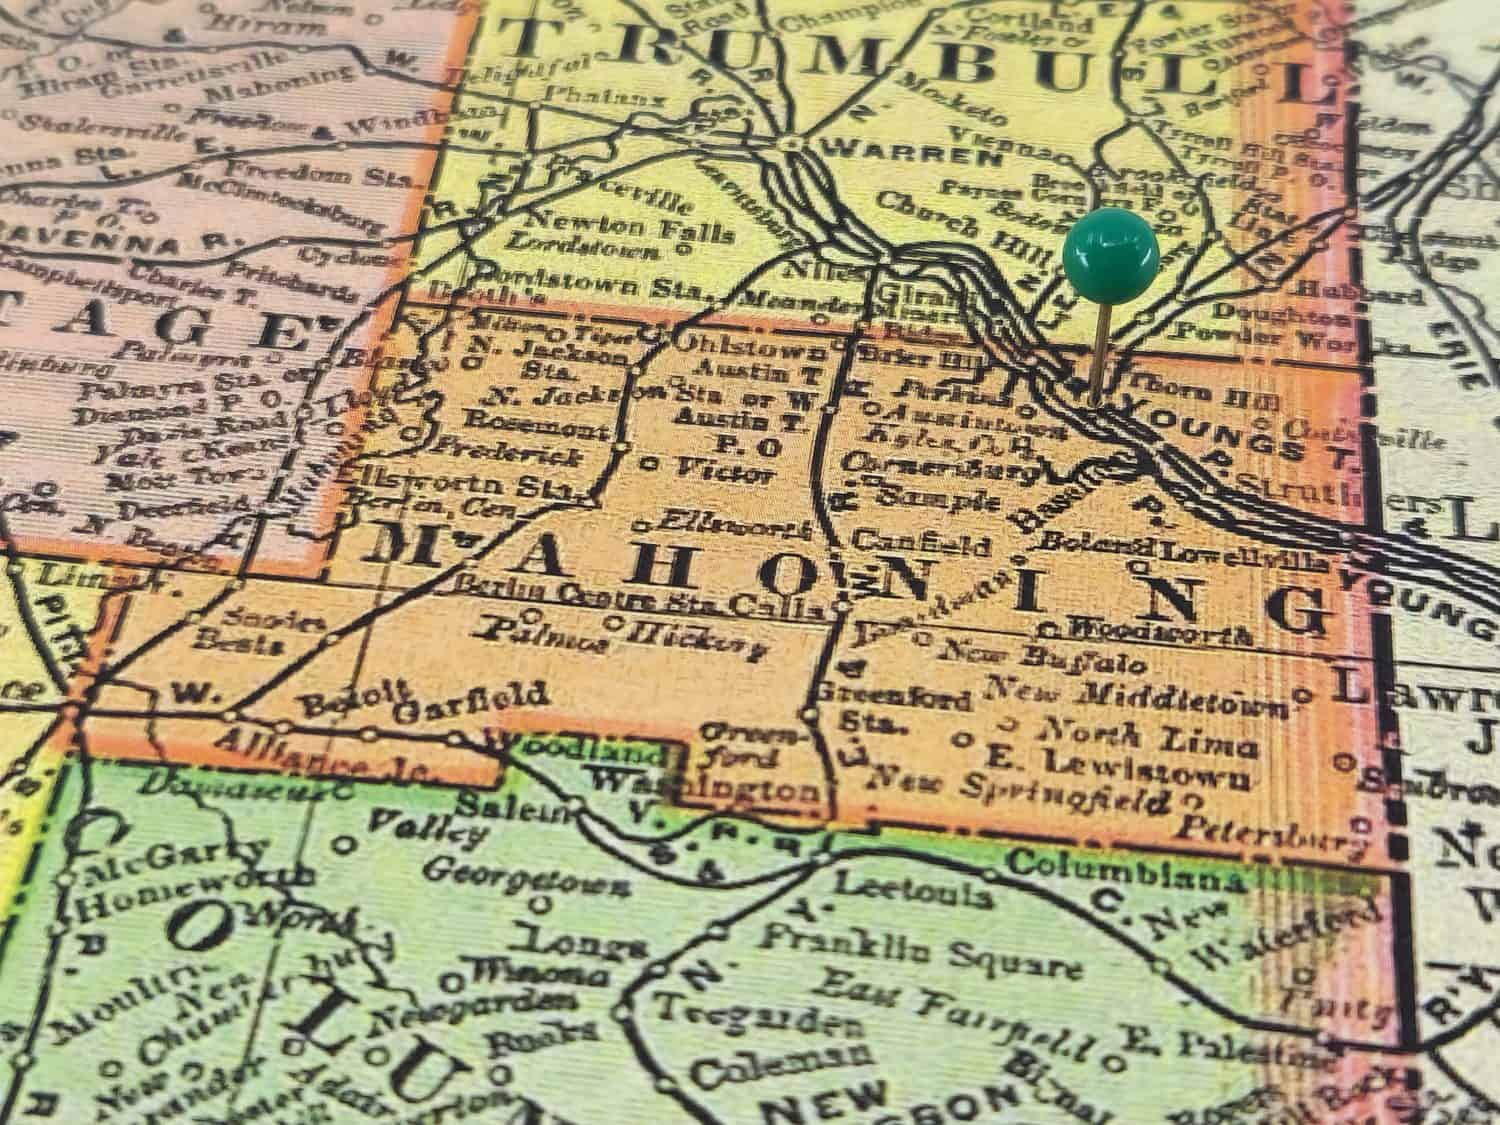 Mahoning County, Ohio marked by a green tack on a colorful vintage map. The county seat is located in the city of Youngstown, OH.